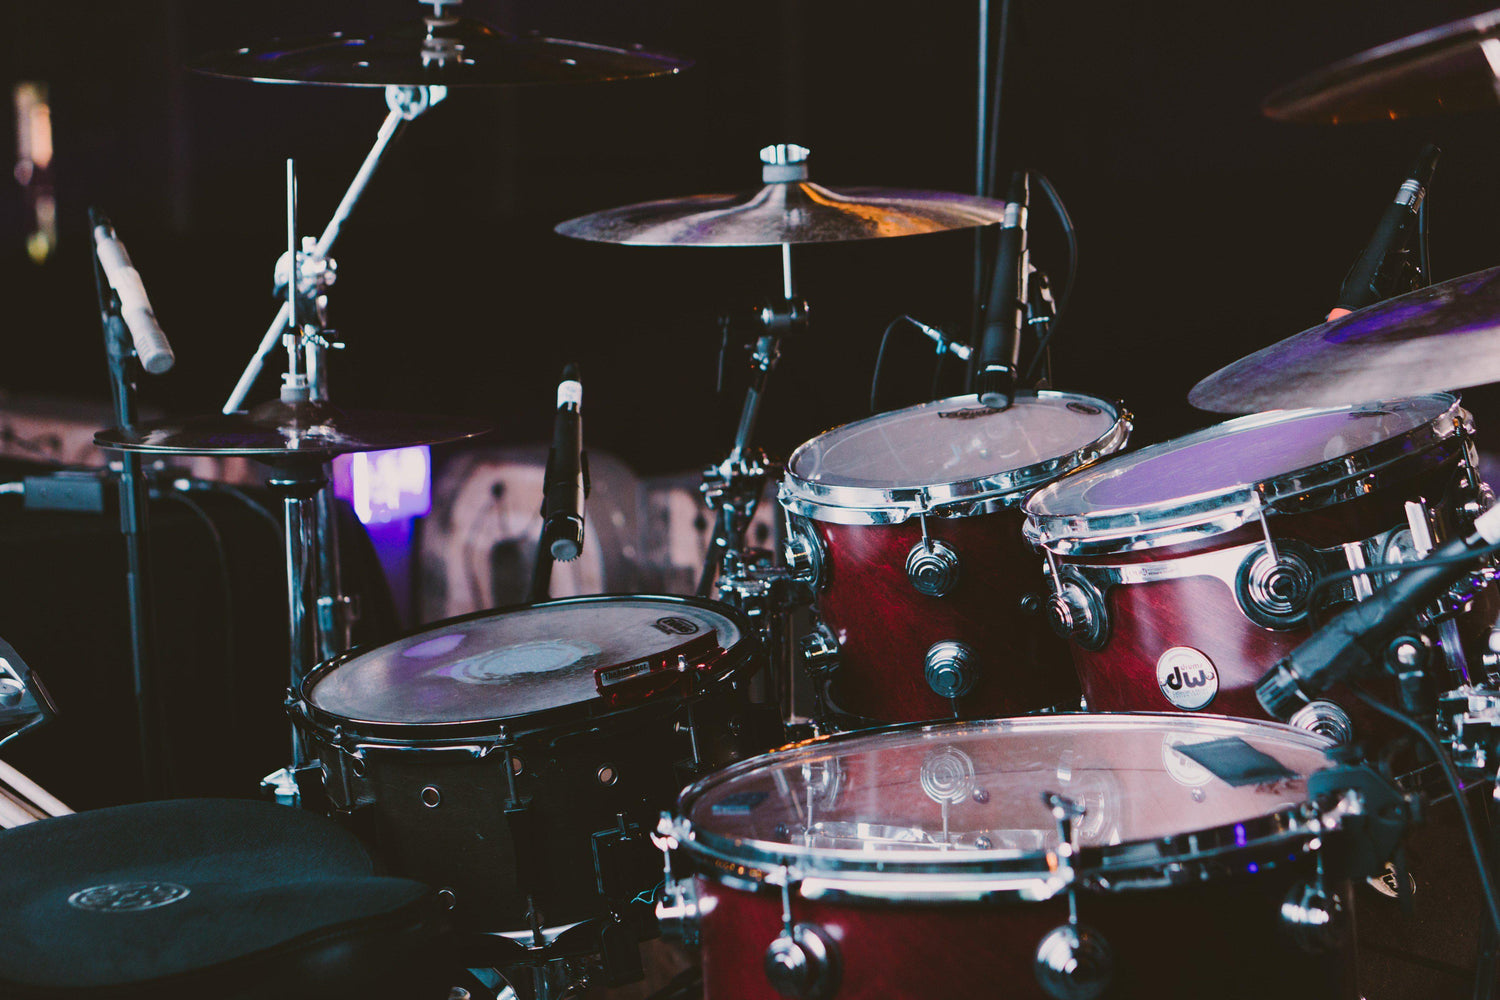 The Definitive Guide to Buying Your First Drum Kit - MusicMajlis